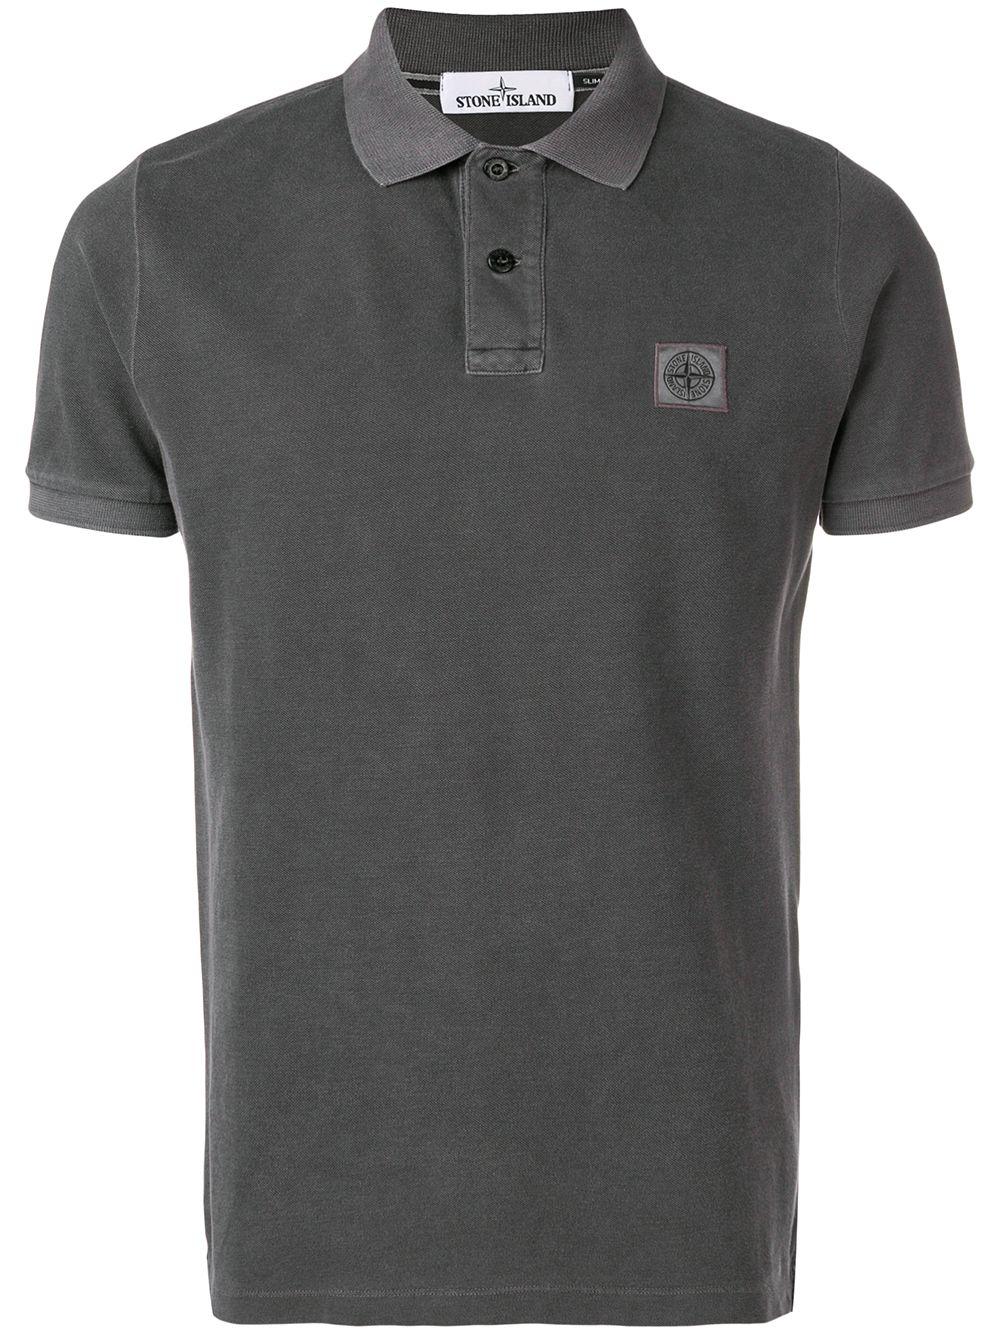 Stone Island Cotton Chest Patch Polo Shirt in Grey (Gray) for Men - Lyst